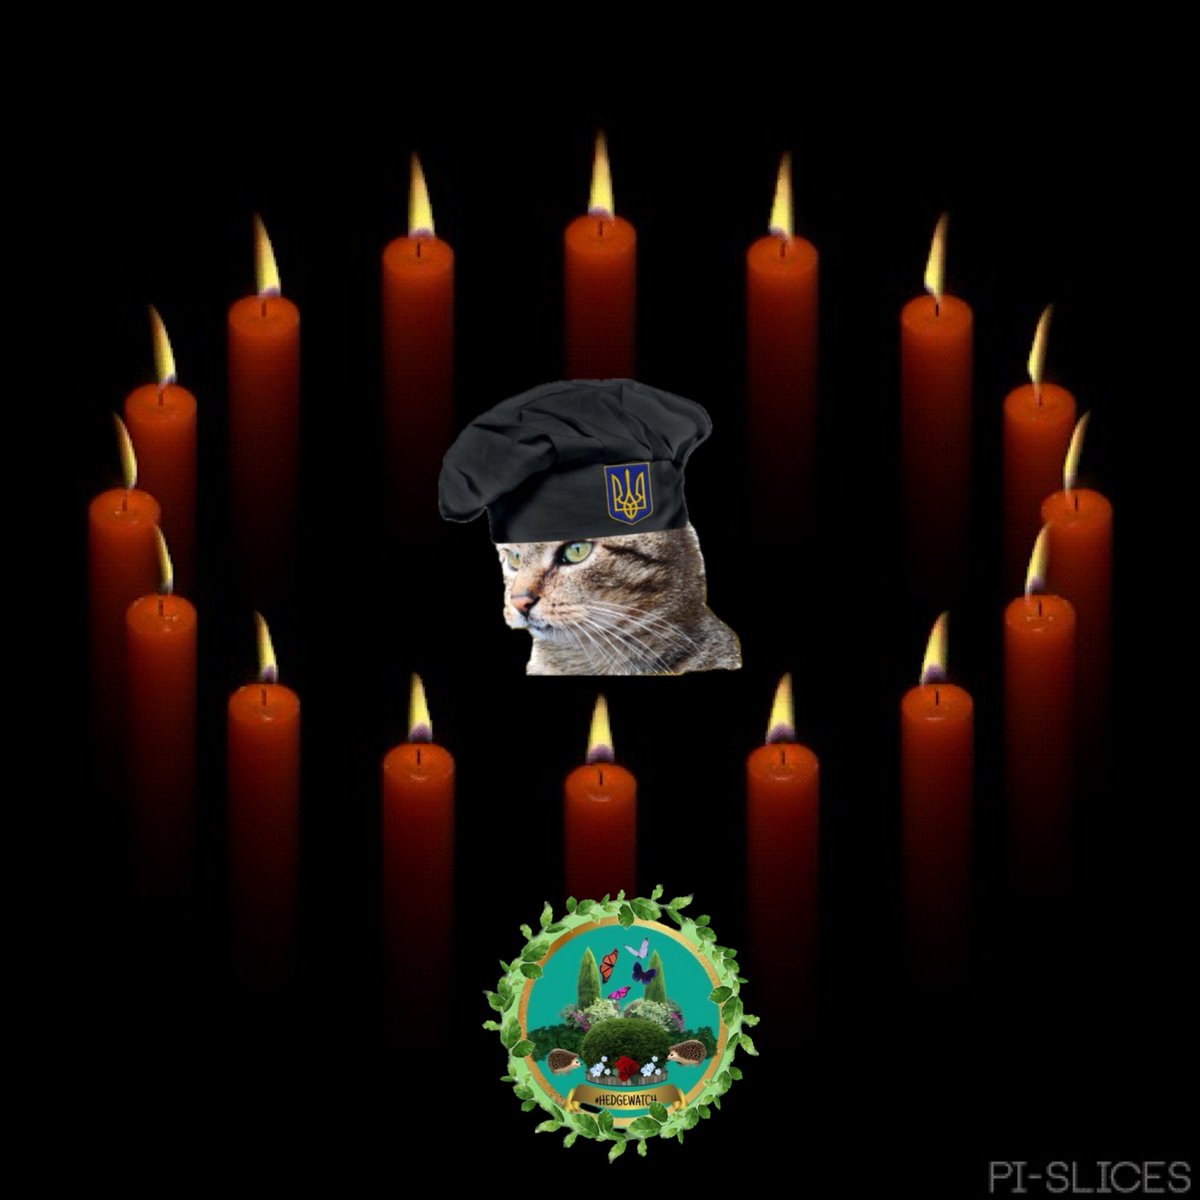 🌈💔It is with sad and heavy hearts we have to light our #Hedgewatch groupcandle for our dear pal Chef Anton @landscape28 who Watches Heavenly Hedges now. May this candle enlighten your path and bring comfort to your Dad, family and friends. Bye dear Anton. Until we meet again✨